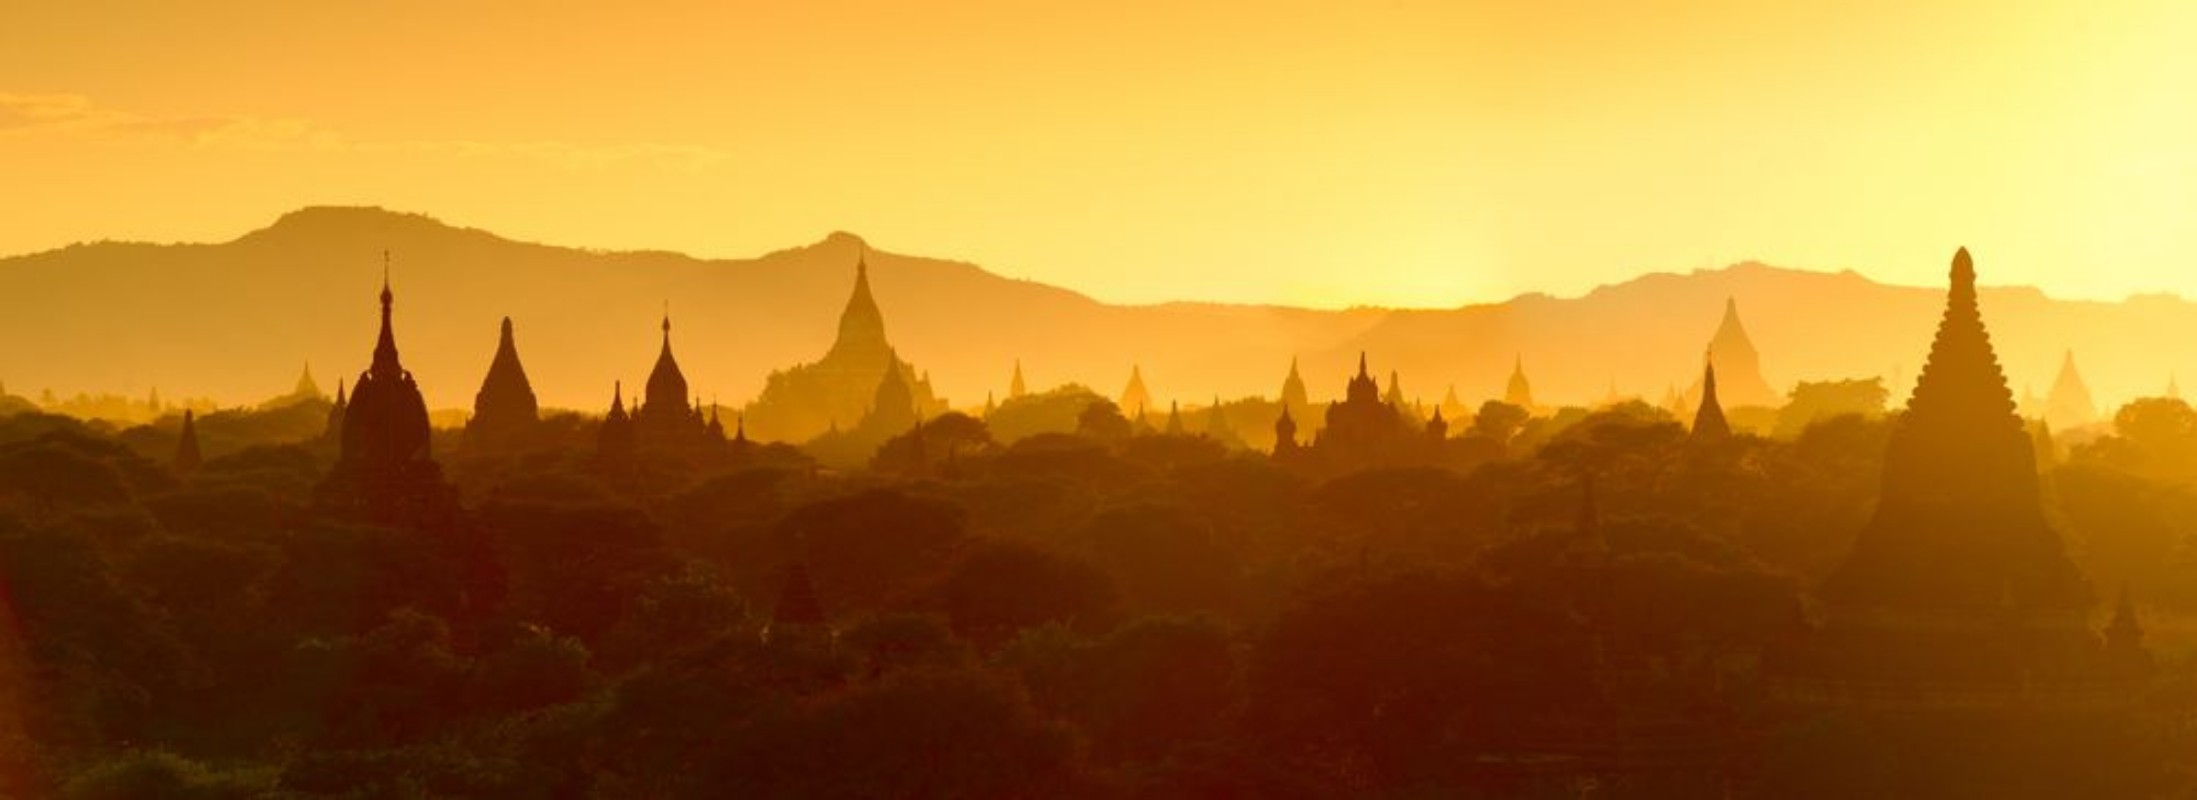 Picture of Temples in Bagan